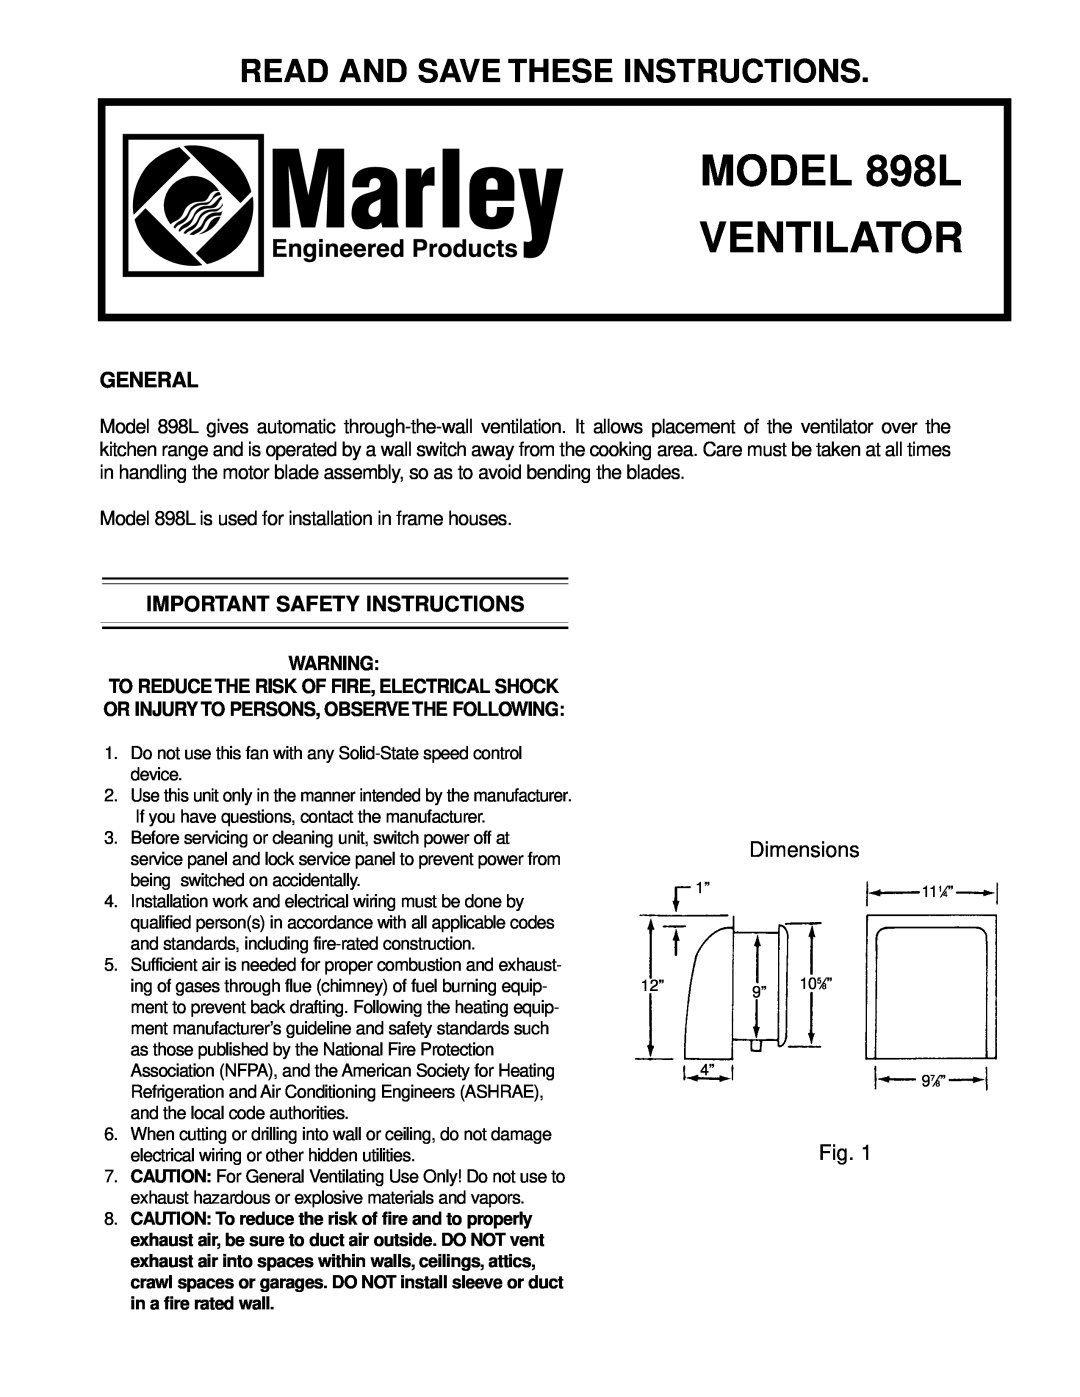 Marley Engineered Products 898L important safety instructions General, Important Safety Instructions 